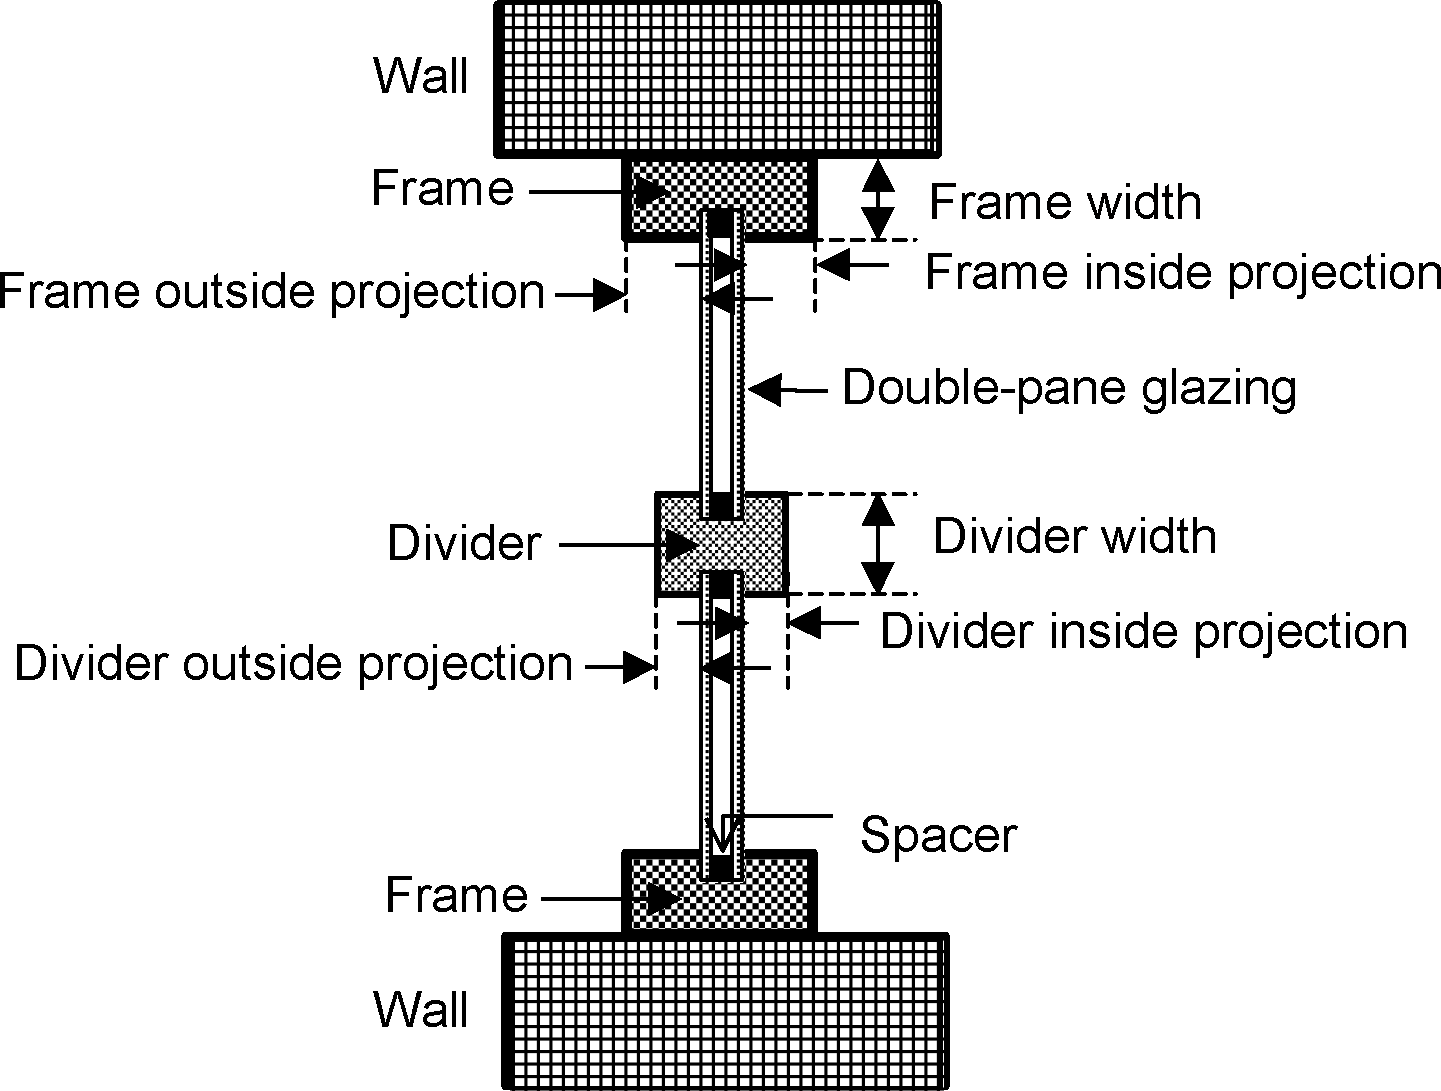 Cross section through a window showing frame and divider (exaggerated horizontally). [fig:cross-section-through-a-window-showing-frame]